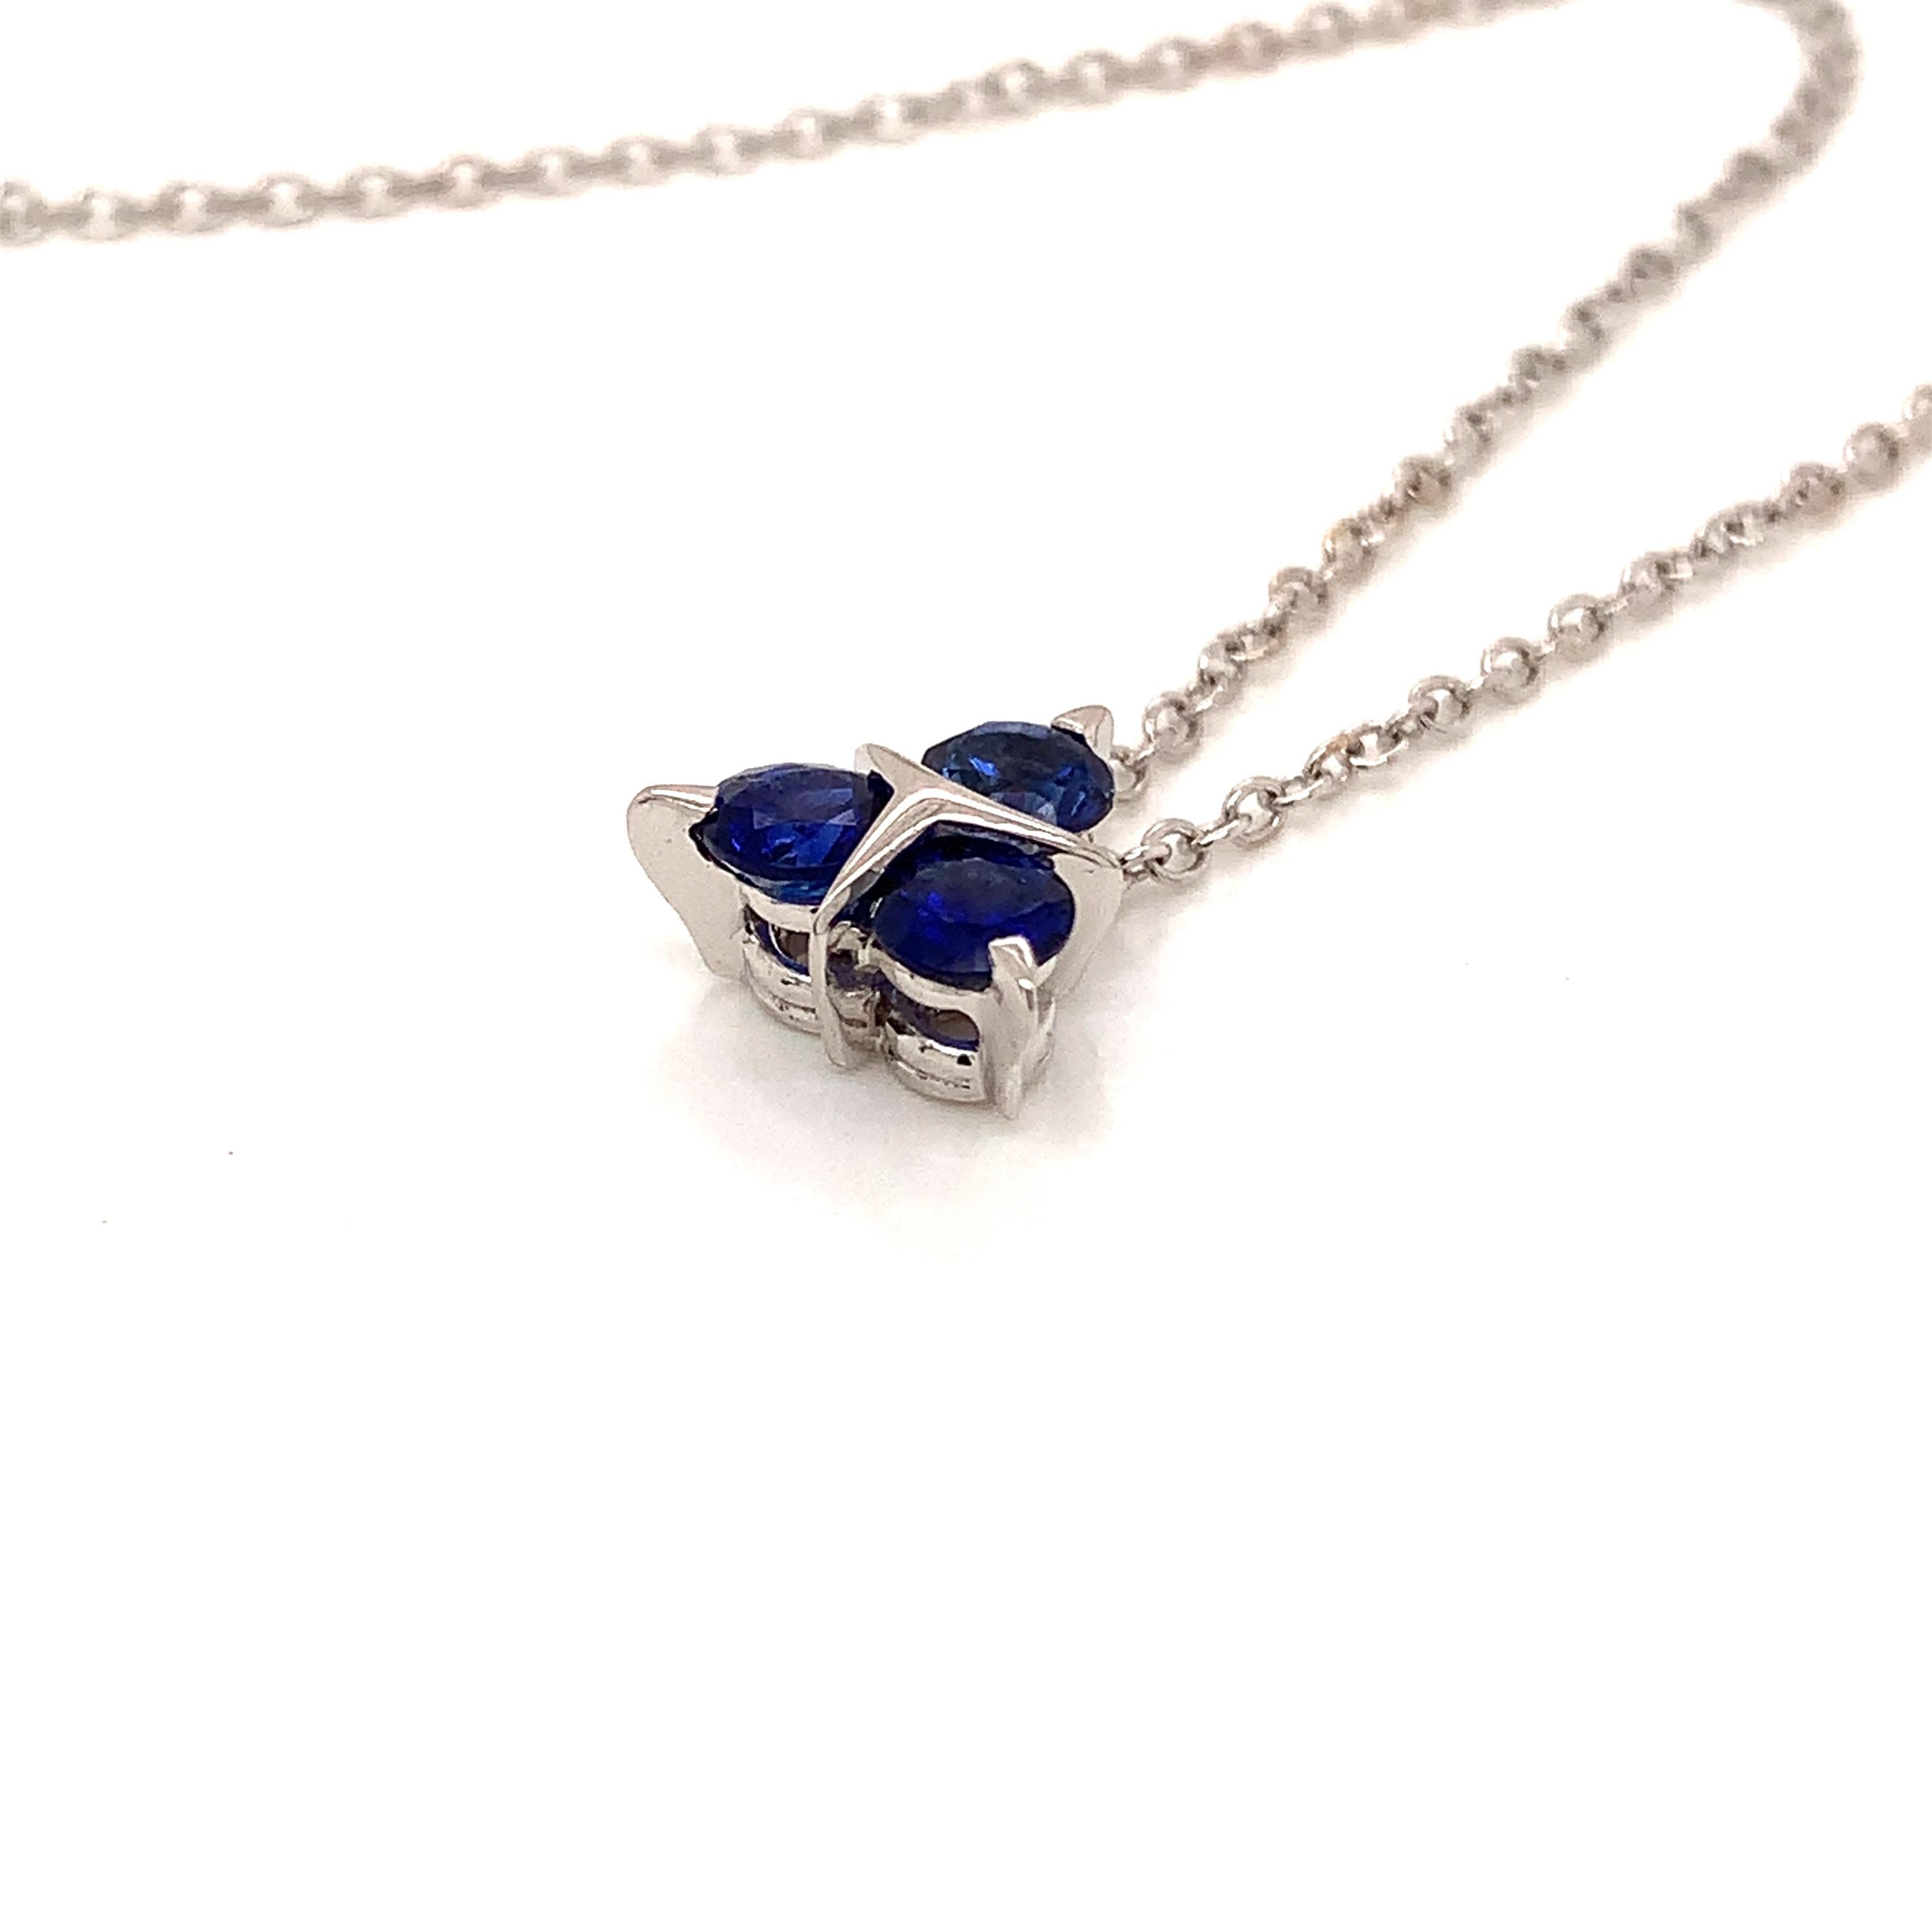 Garavelli pendant with chain in  very unique and pretty design, in white gold 18 kt with three perfect round blue sapphires to a total carat weight of 0.70
 Available also in diamonds, emeralds, pink sapphires, rubies. Matching earrings are